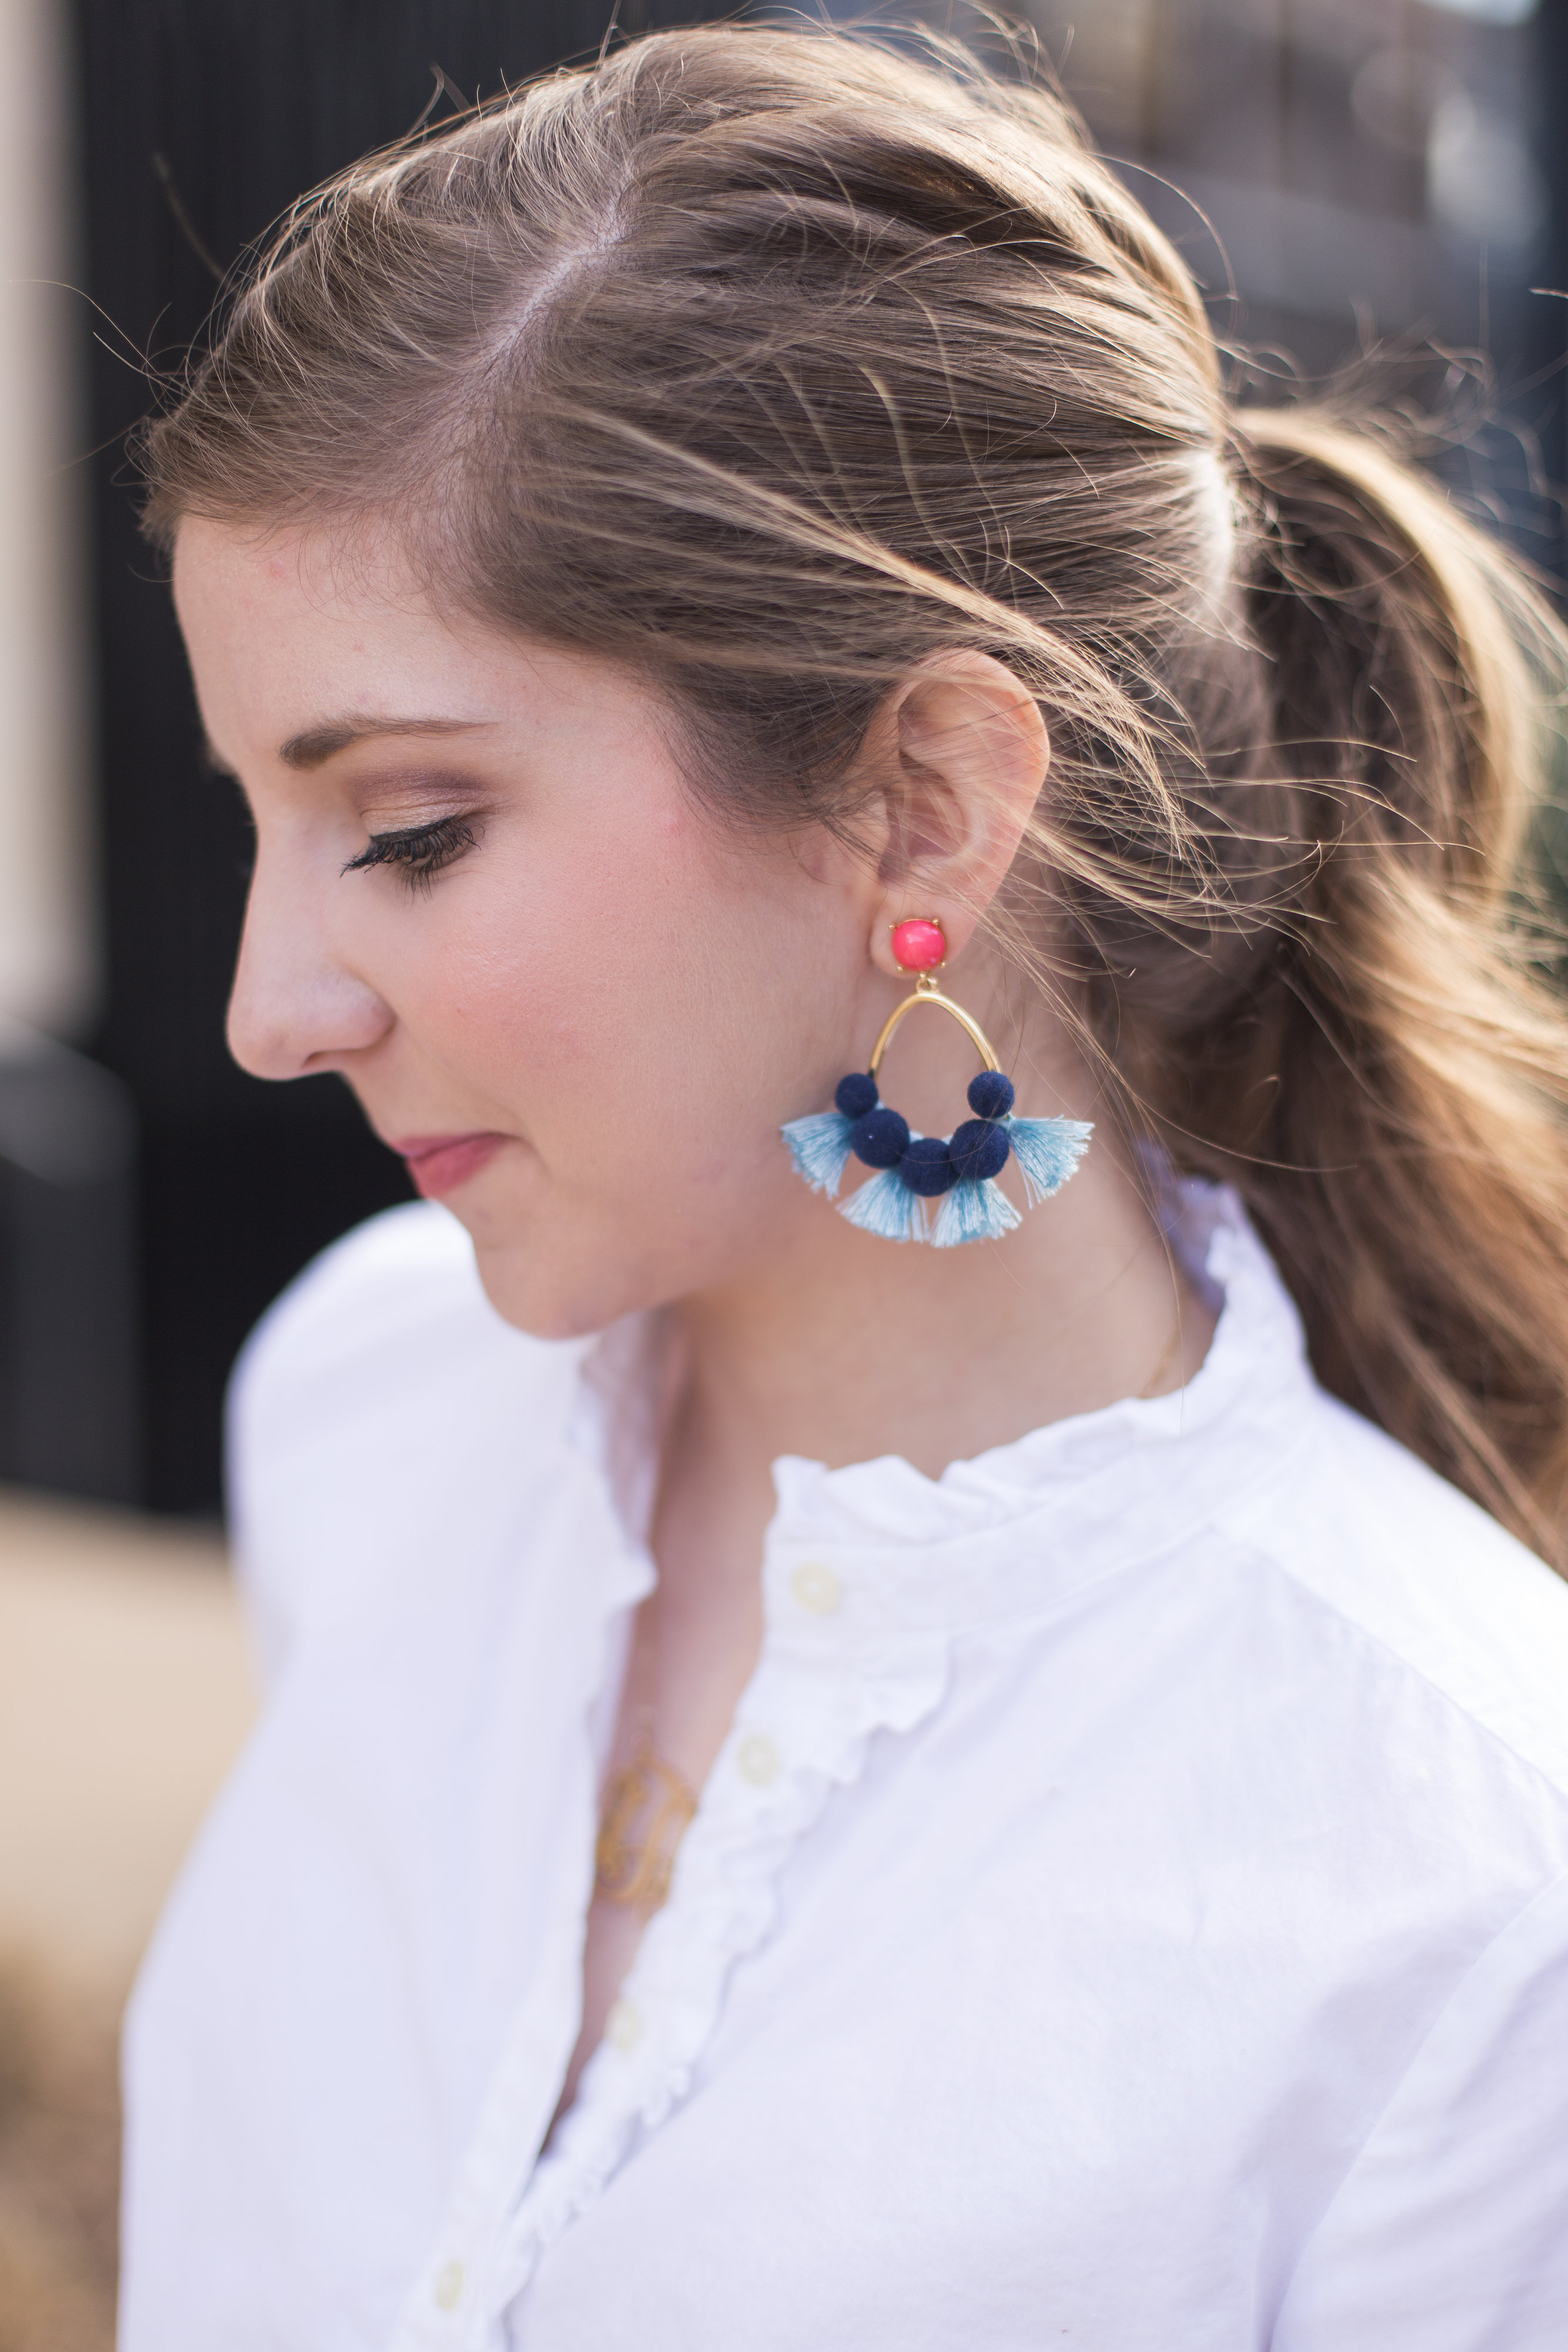 How To Wear Statement Earrings with Style? – TrendSurvivor